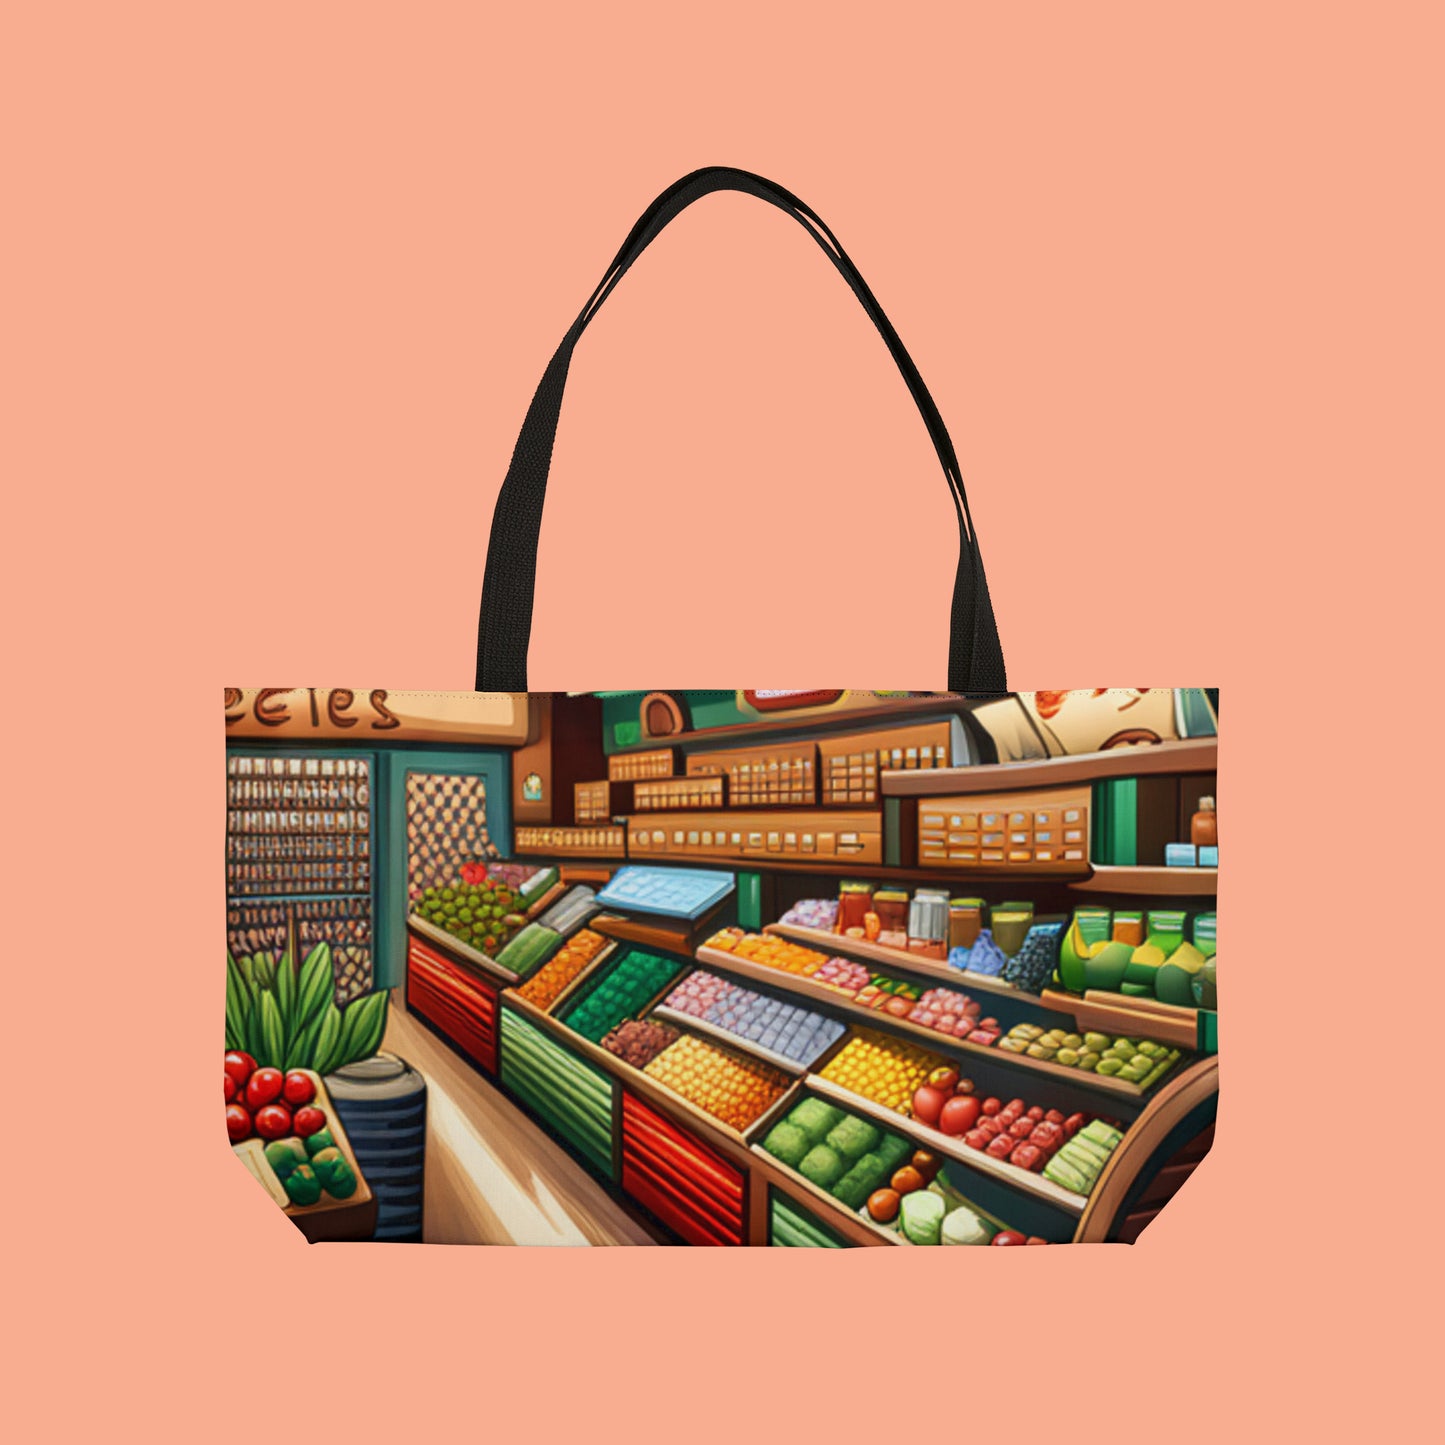 Don’t forget to bring this to the grocery store! A great way to help our planet with this Weekender Tote Bag.